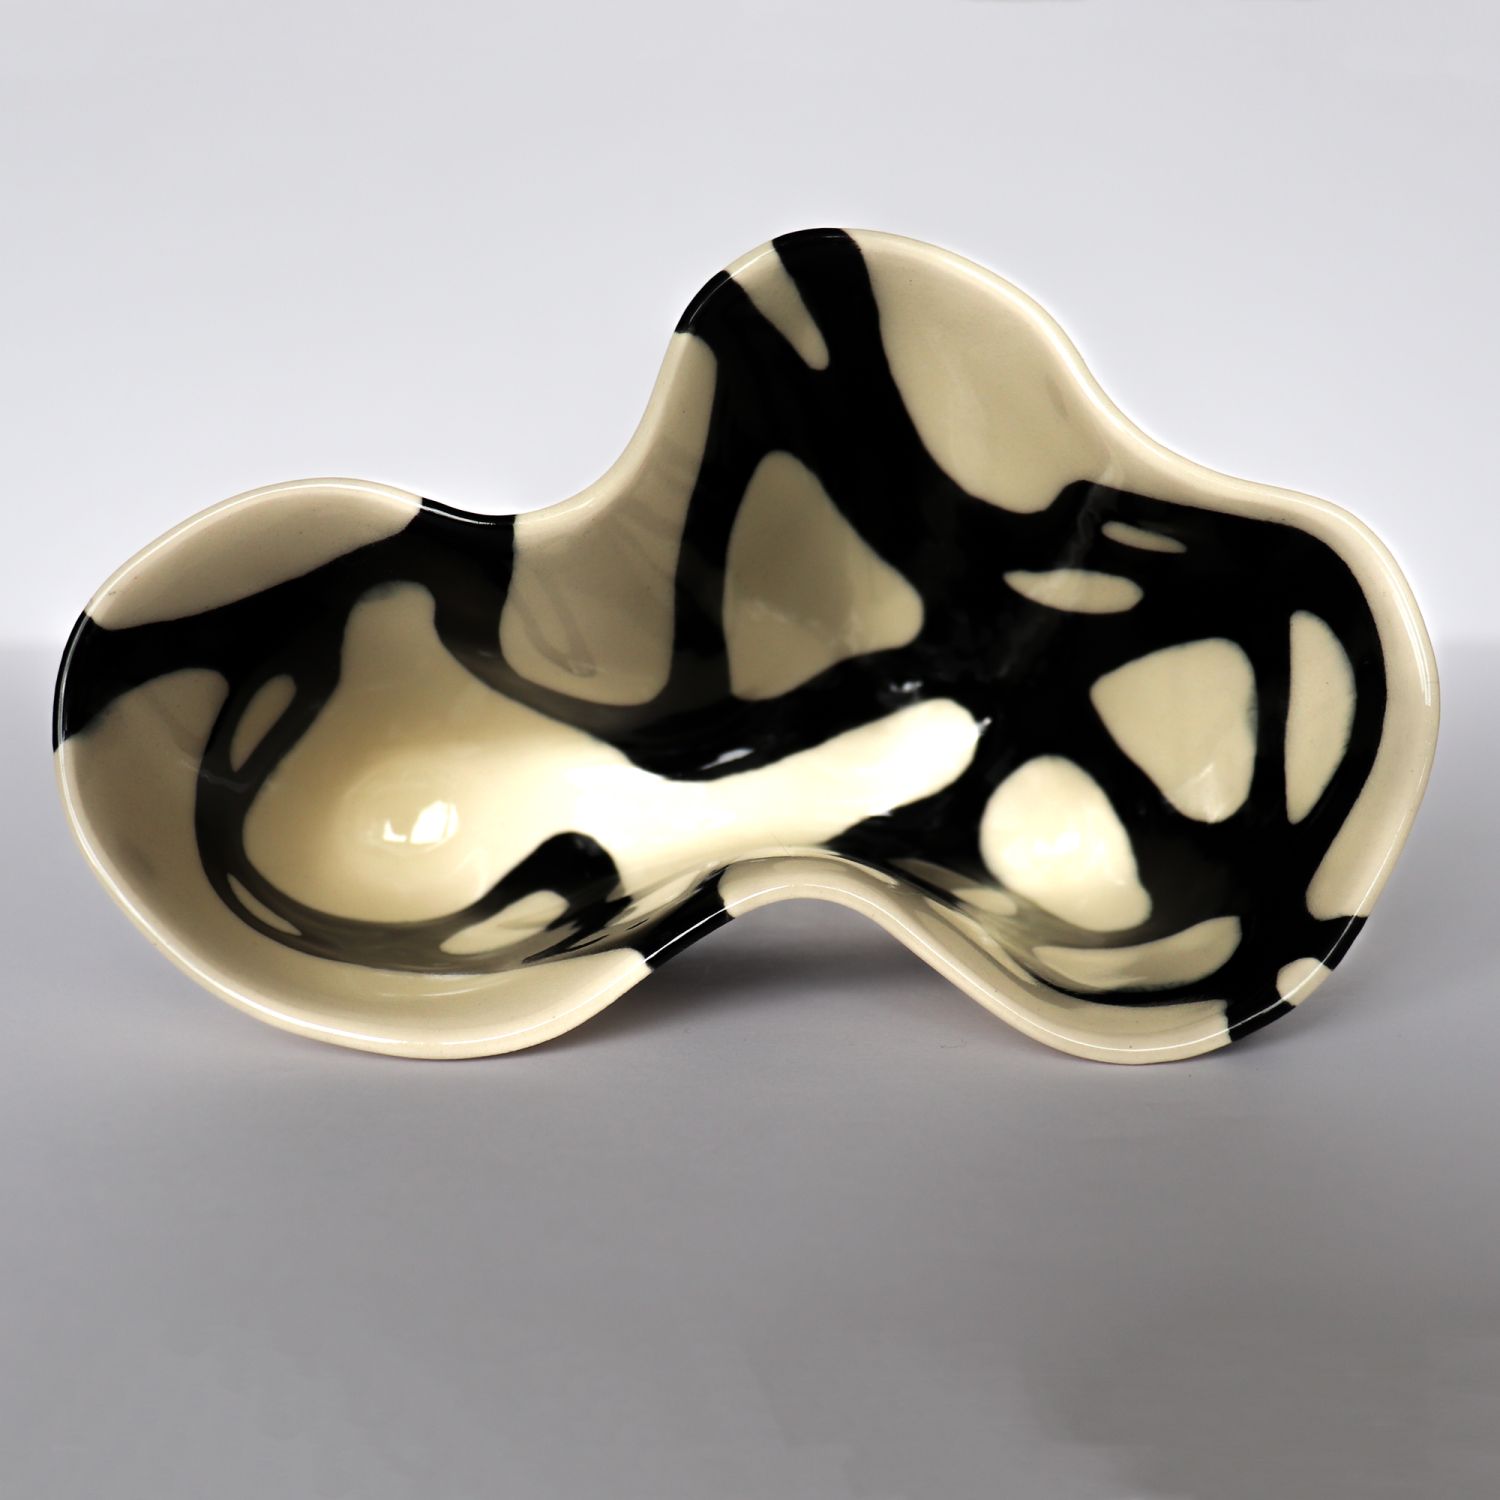 Alana Marcoccia: Interconnected Sculptural Bowl Product Image 1 of 12